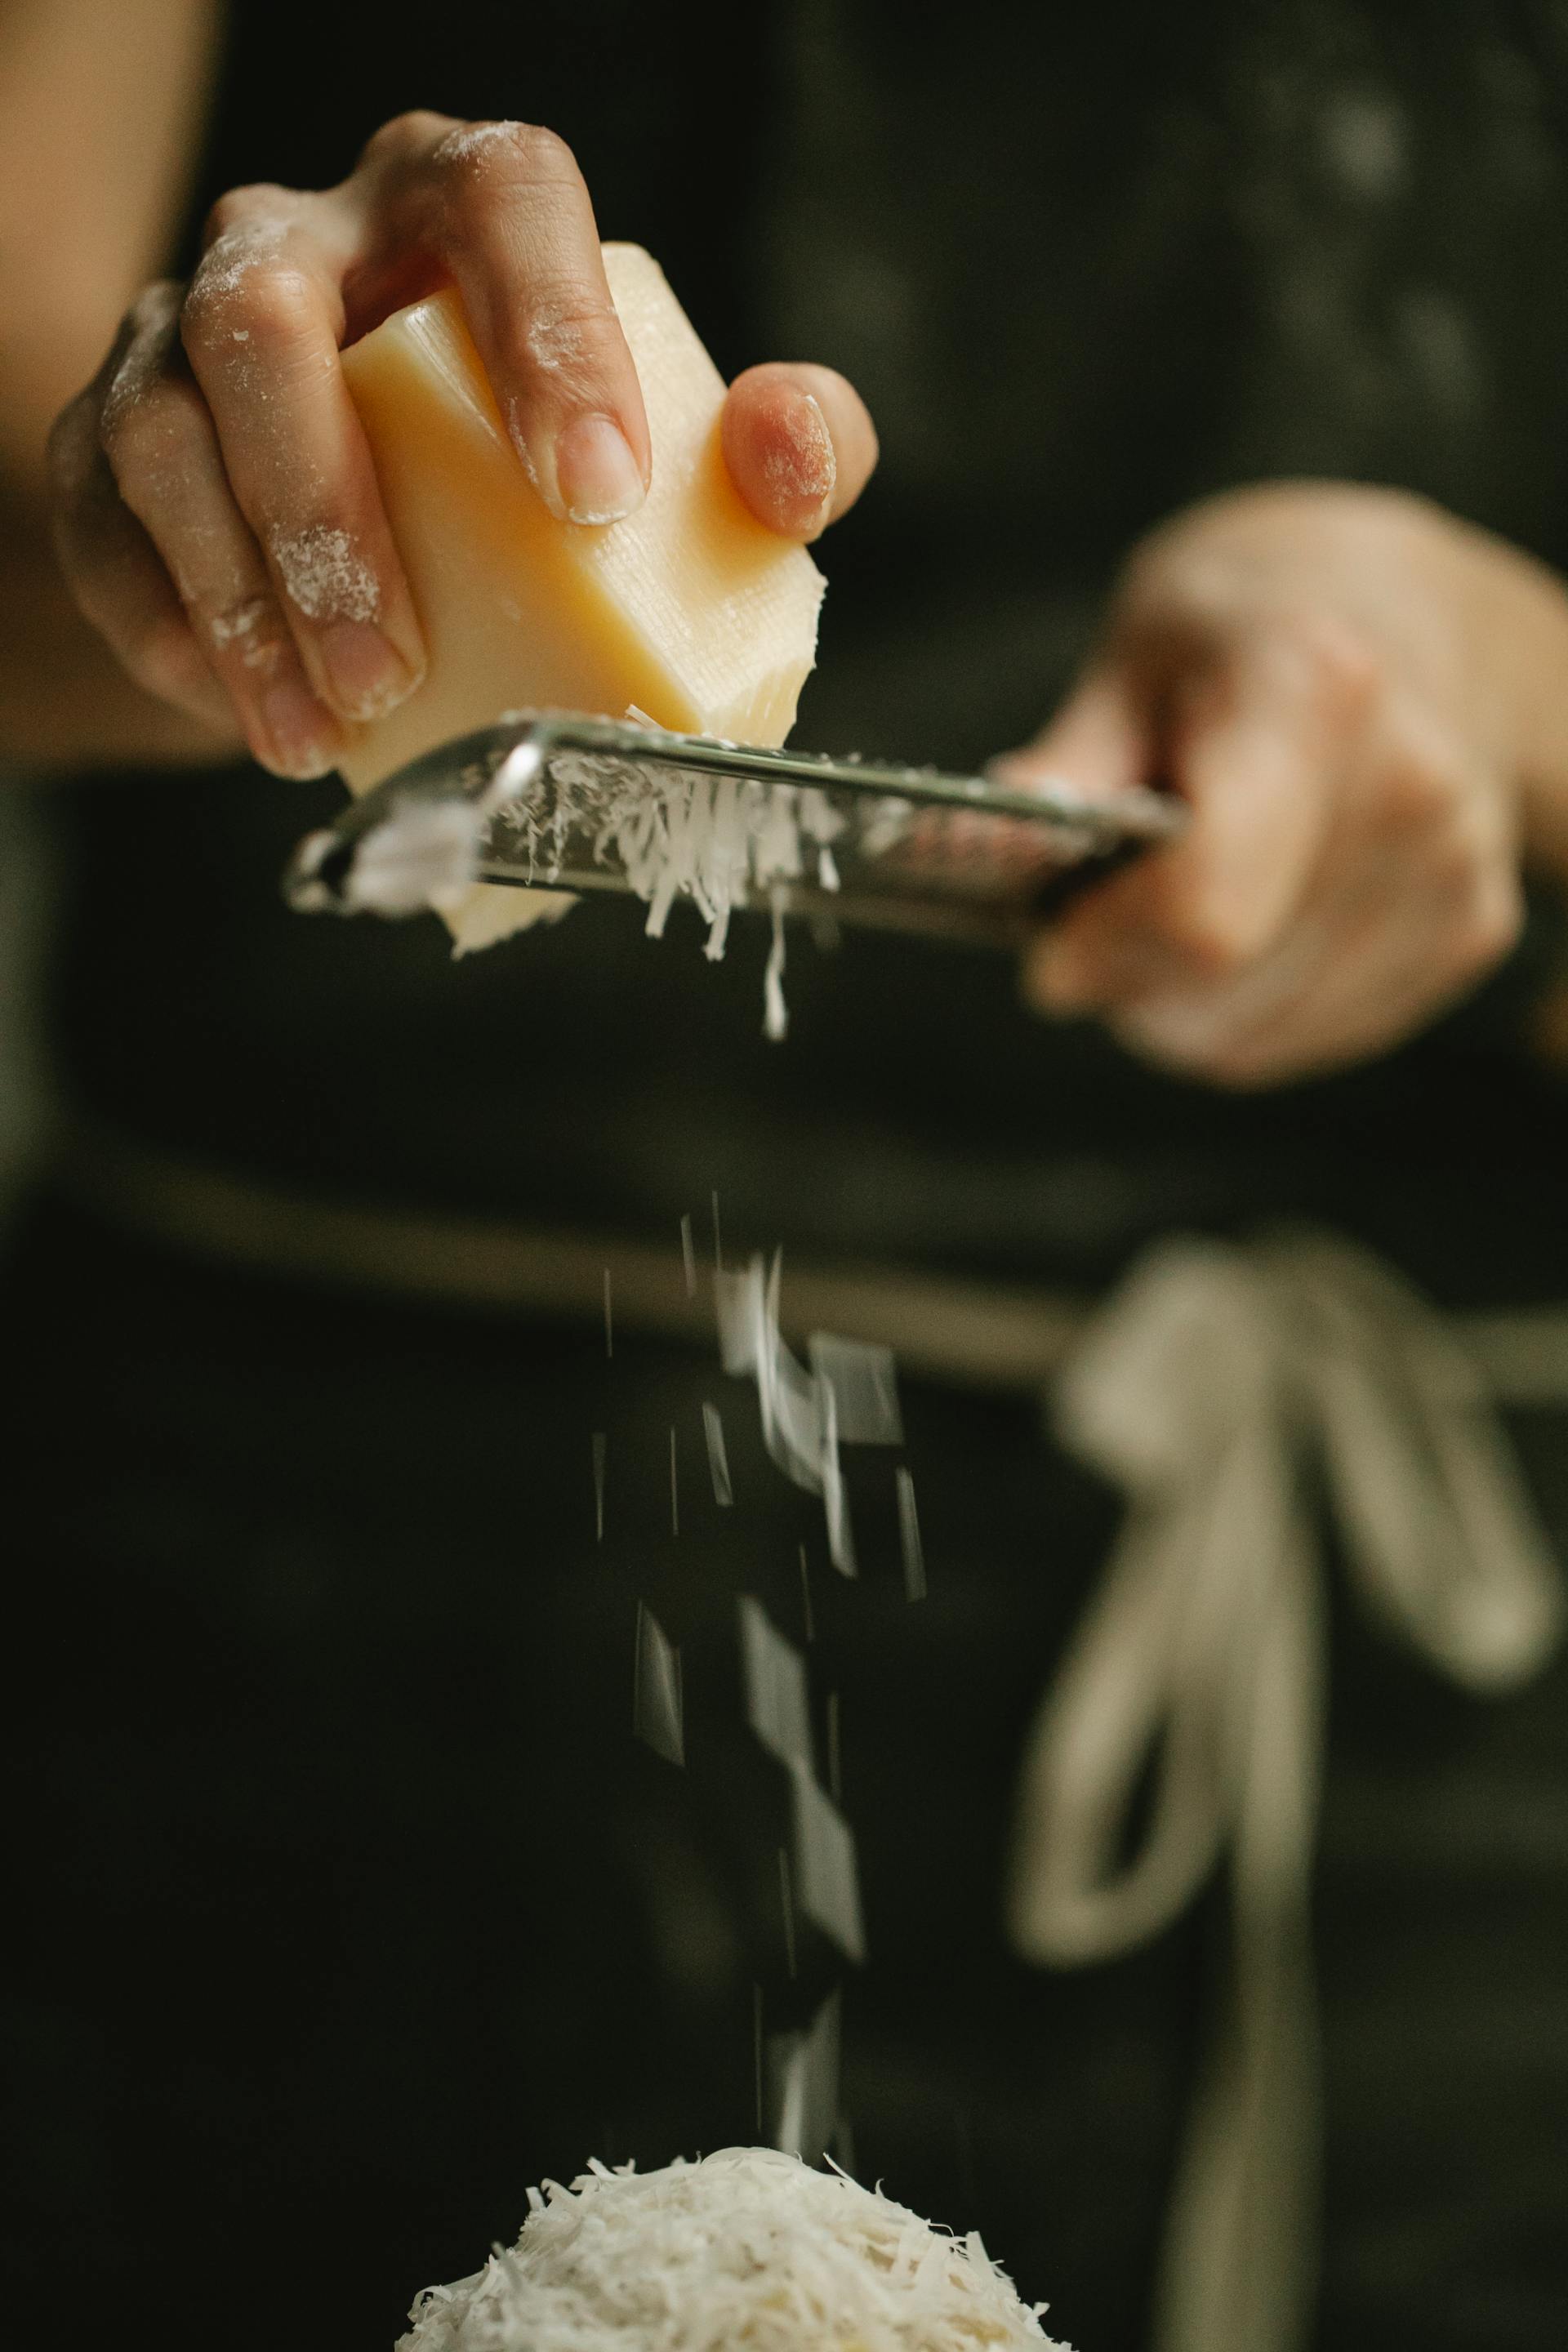 A person grating cheese | Source: Pexels